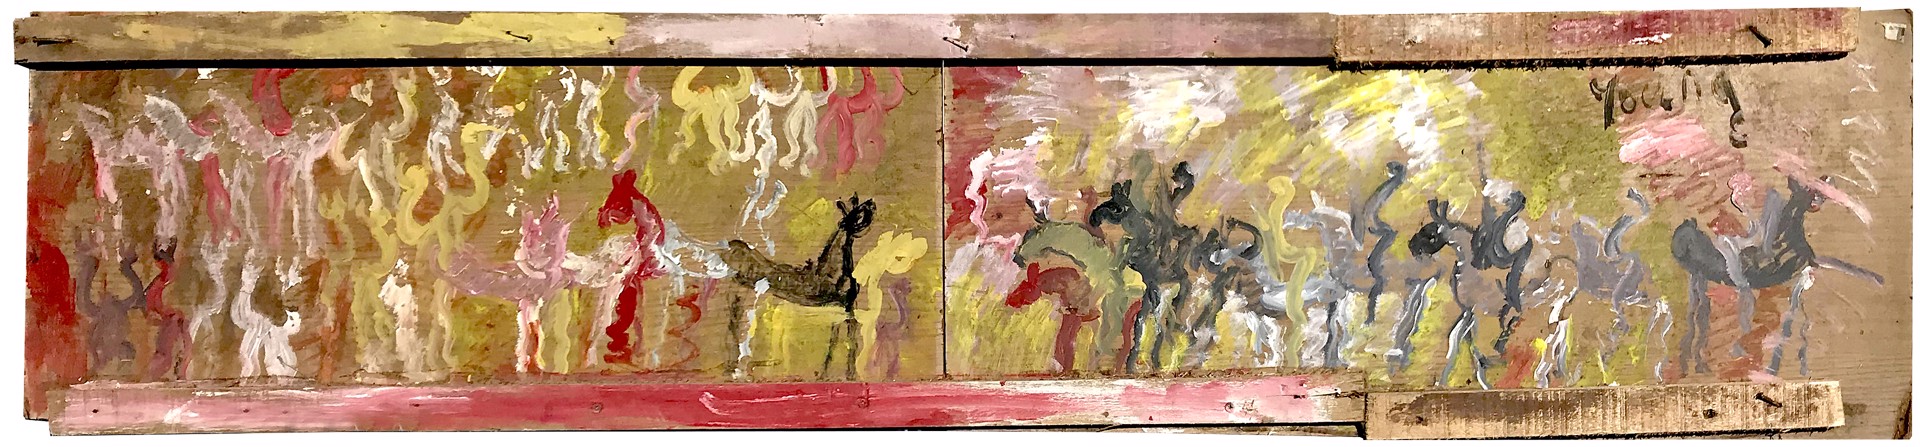 Untitled (Figures, Horses and Warriors) by Purvis Young